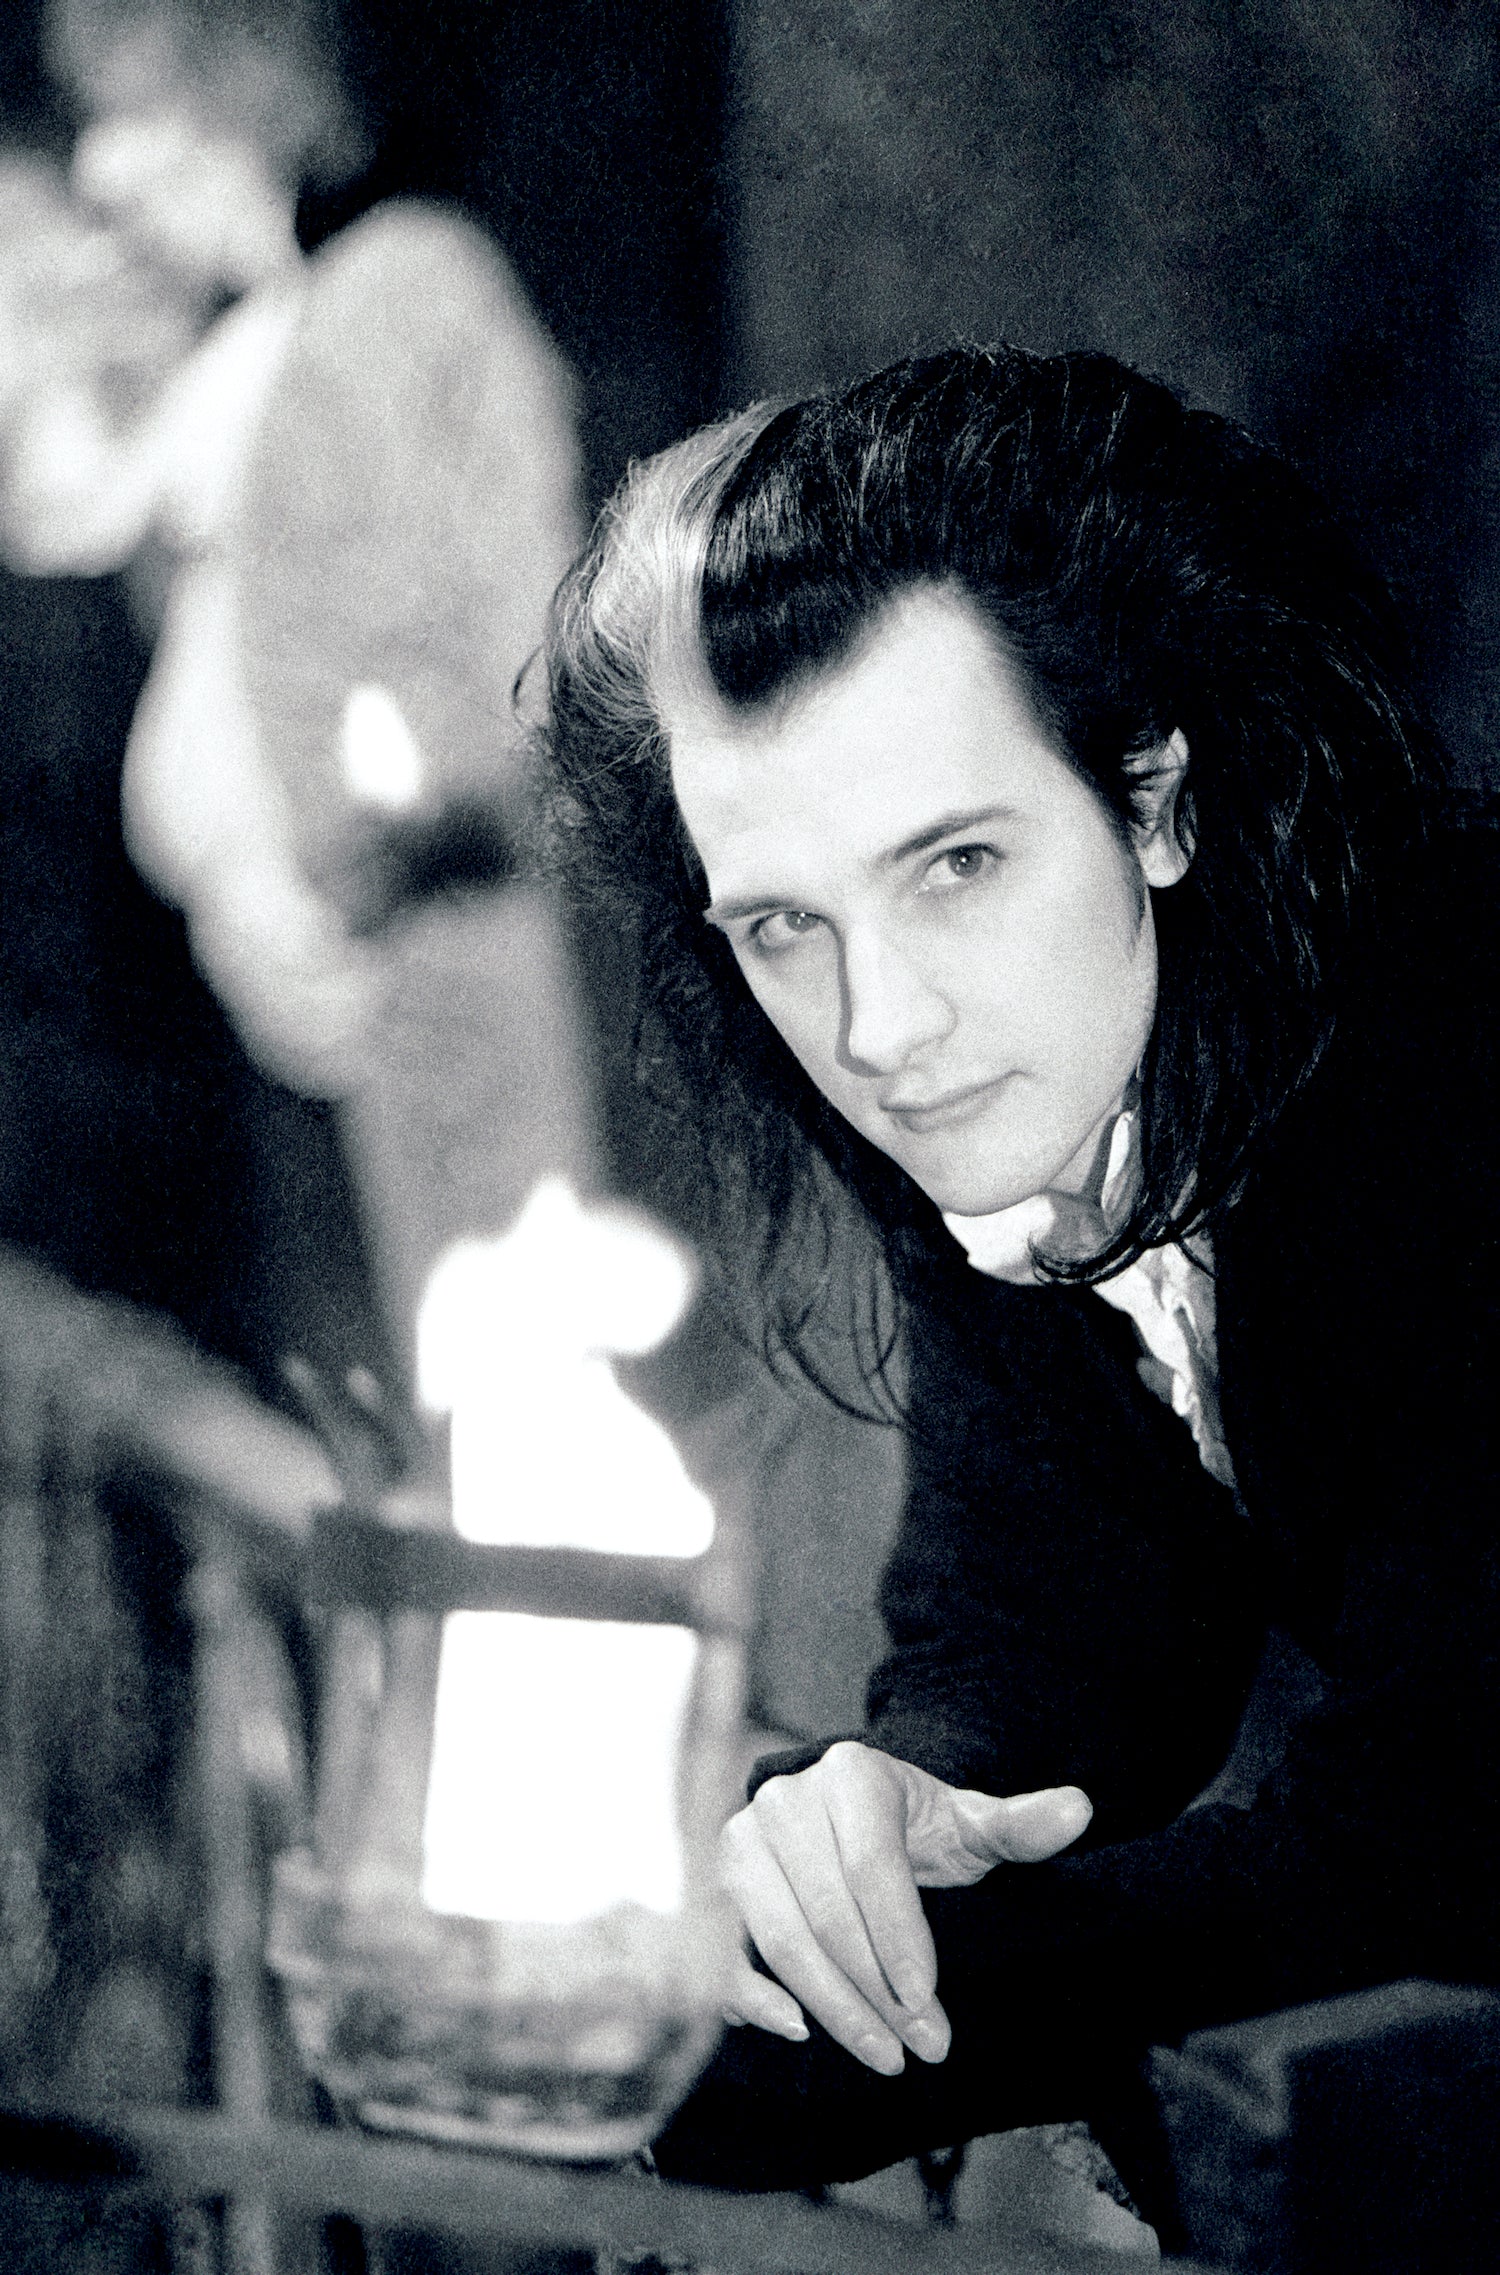 Dave Vanian of The Damned on the set of the Grimly Fiendish video